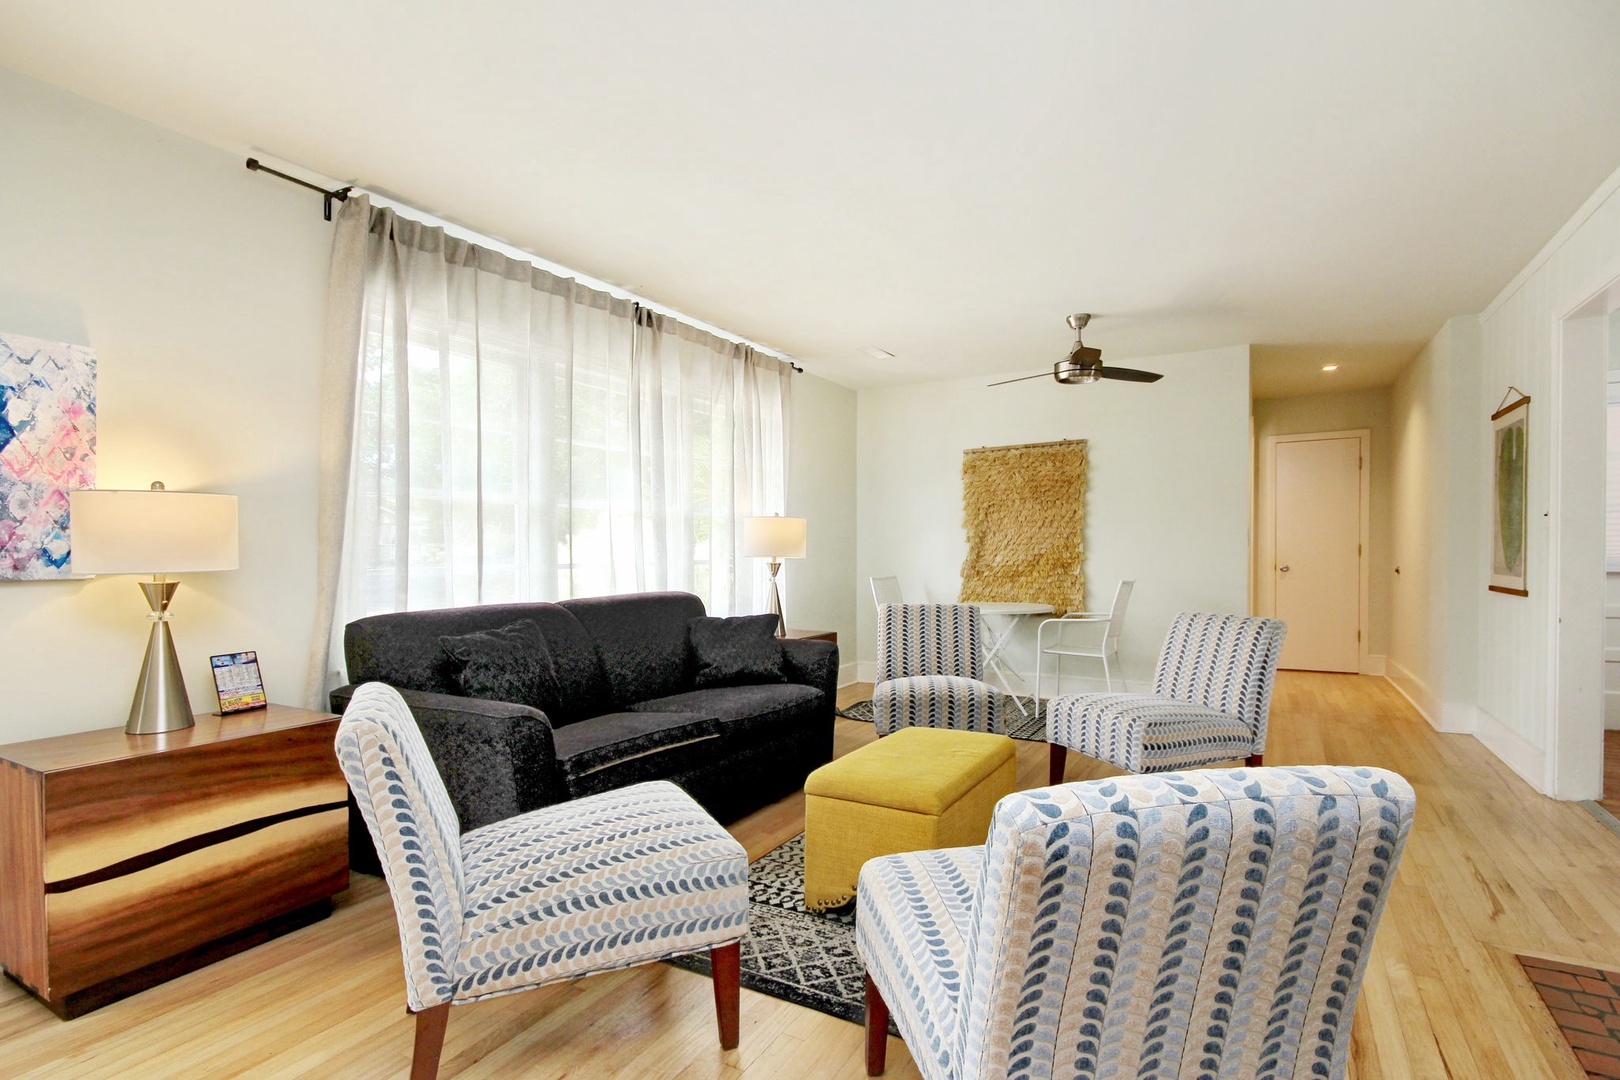 Holiday Shores Beach Cottage | Two King Beds, One Queen Bed, Three Bedroom Suite